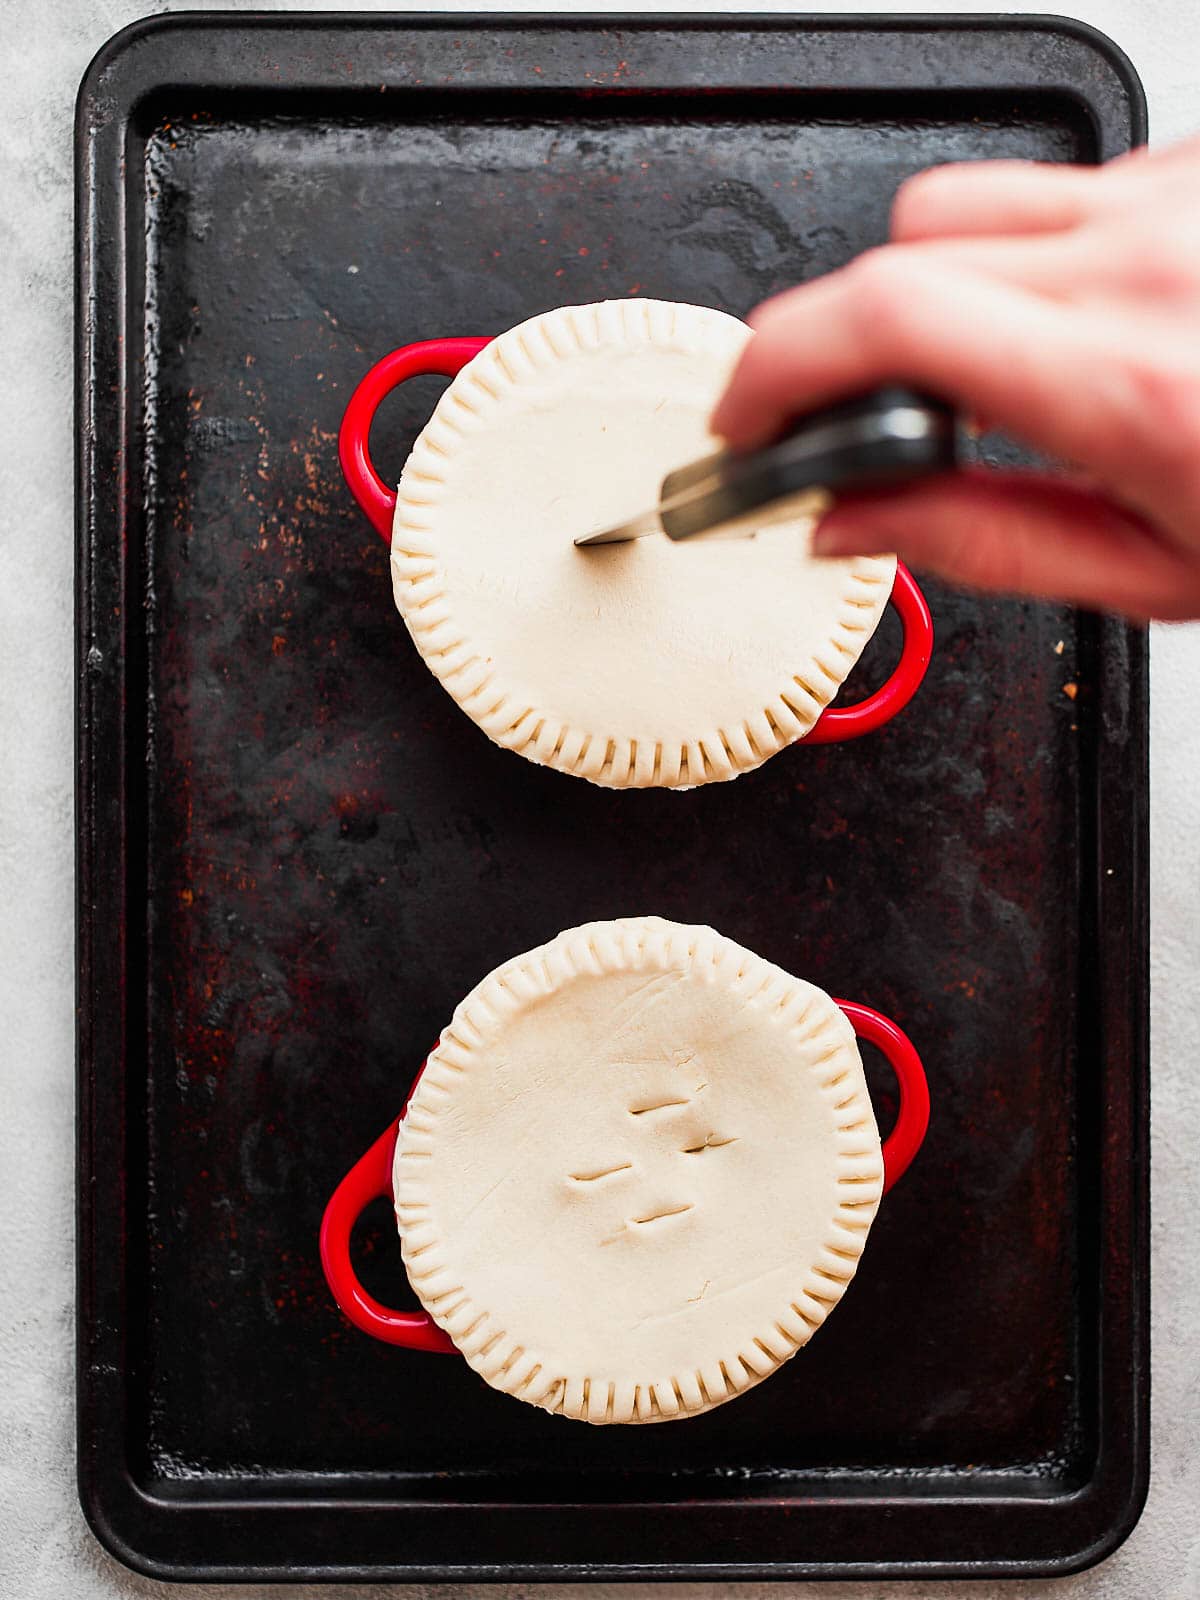 Adding steam holes to the pies